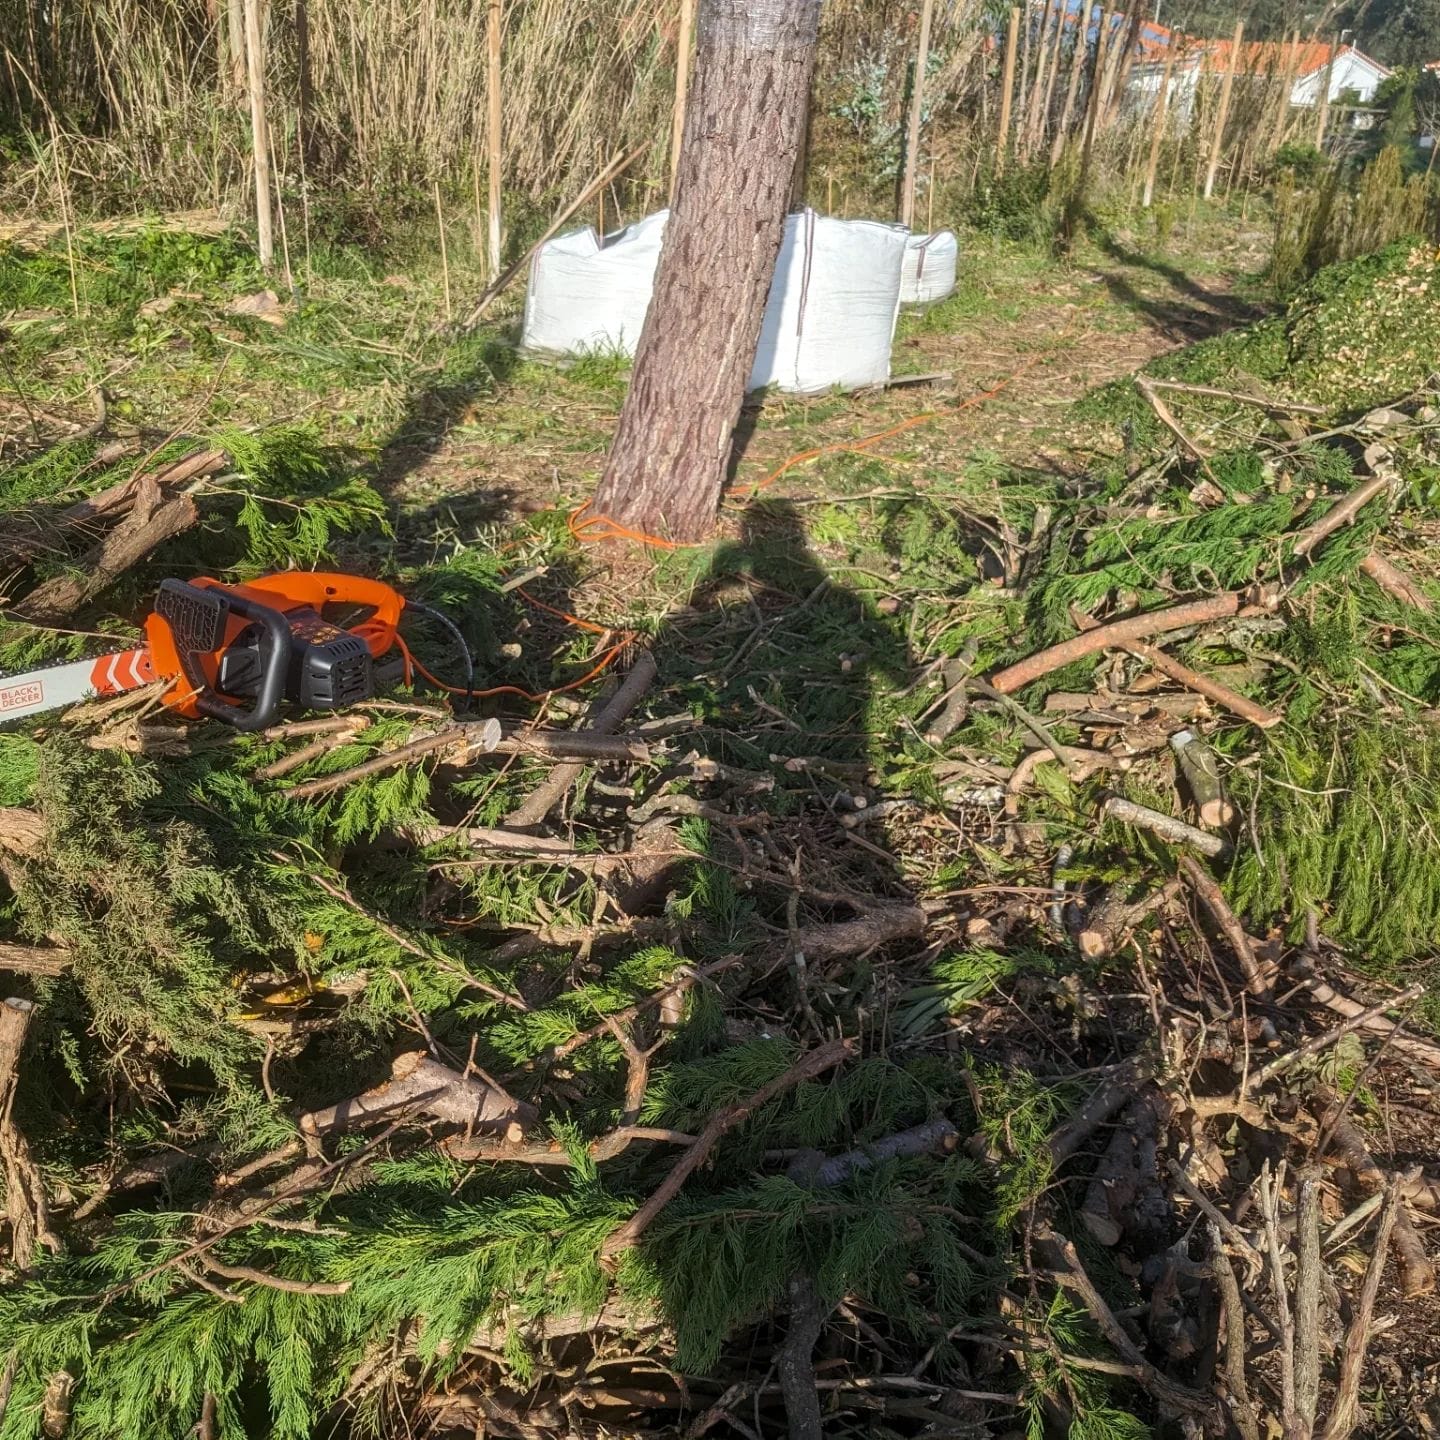 Switched to a corded electric chainsaw for chopping the larger biomass branches